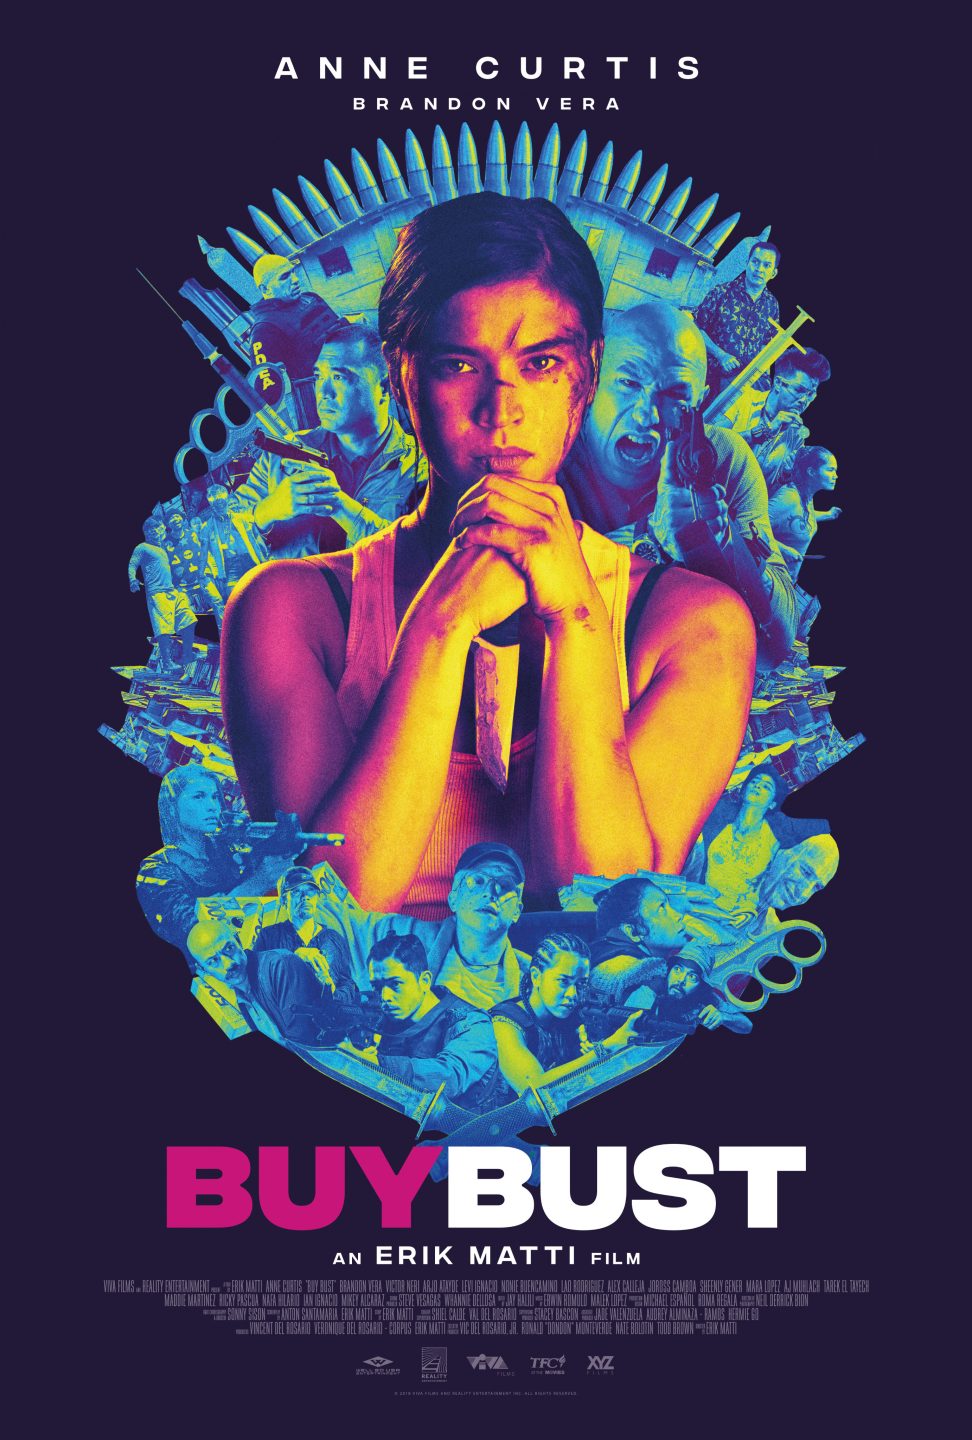 Buy Bust poster (Well Go USA)